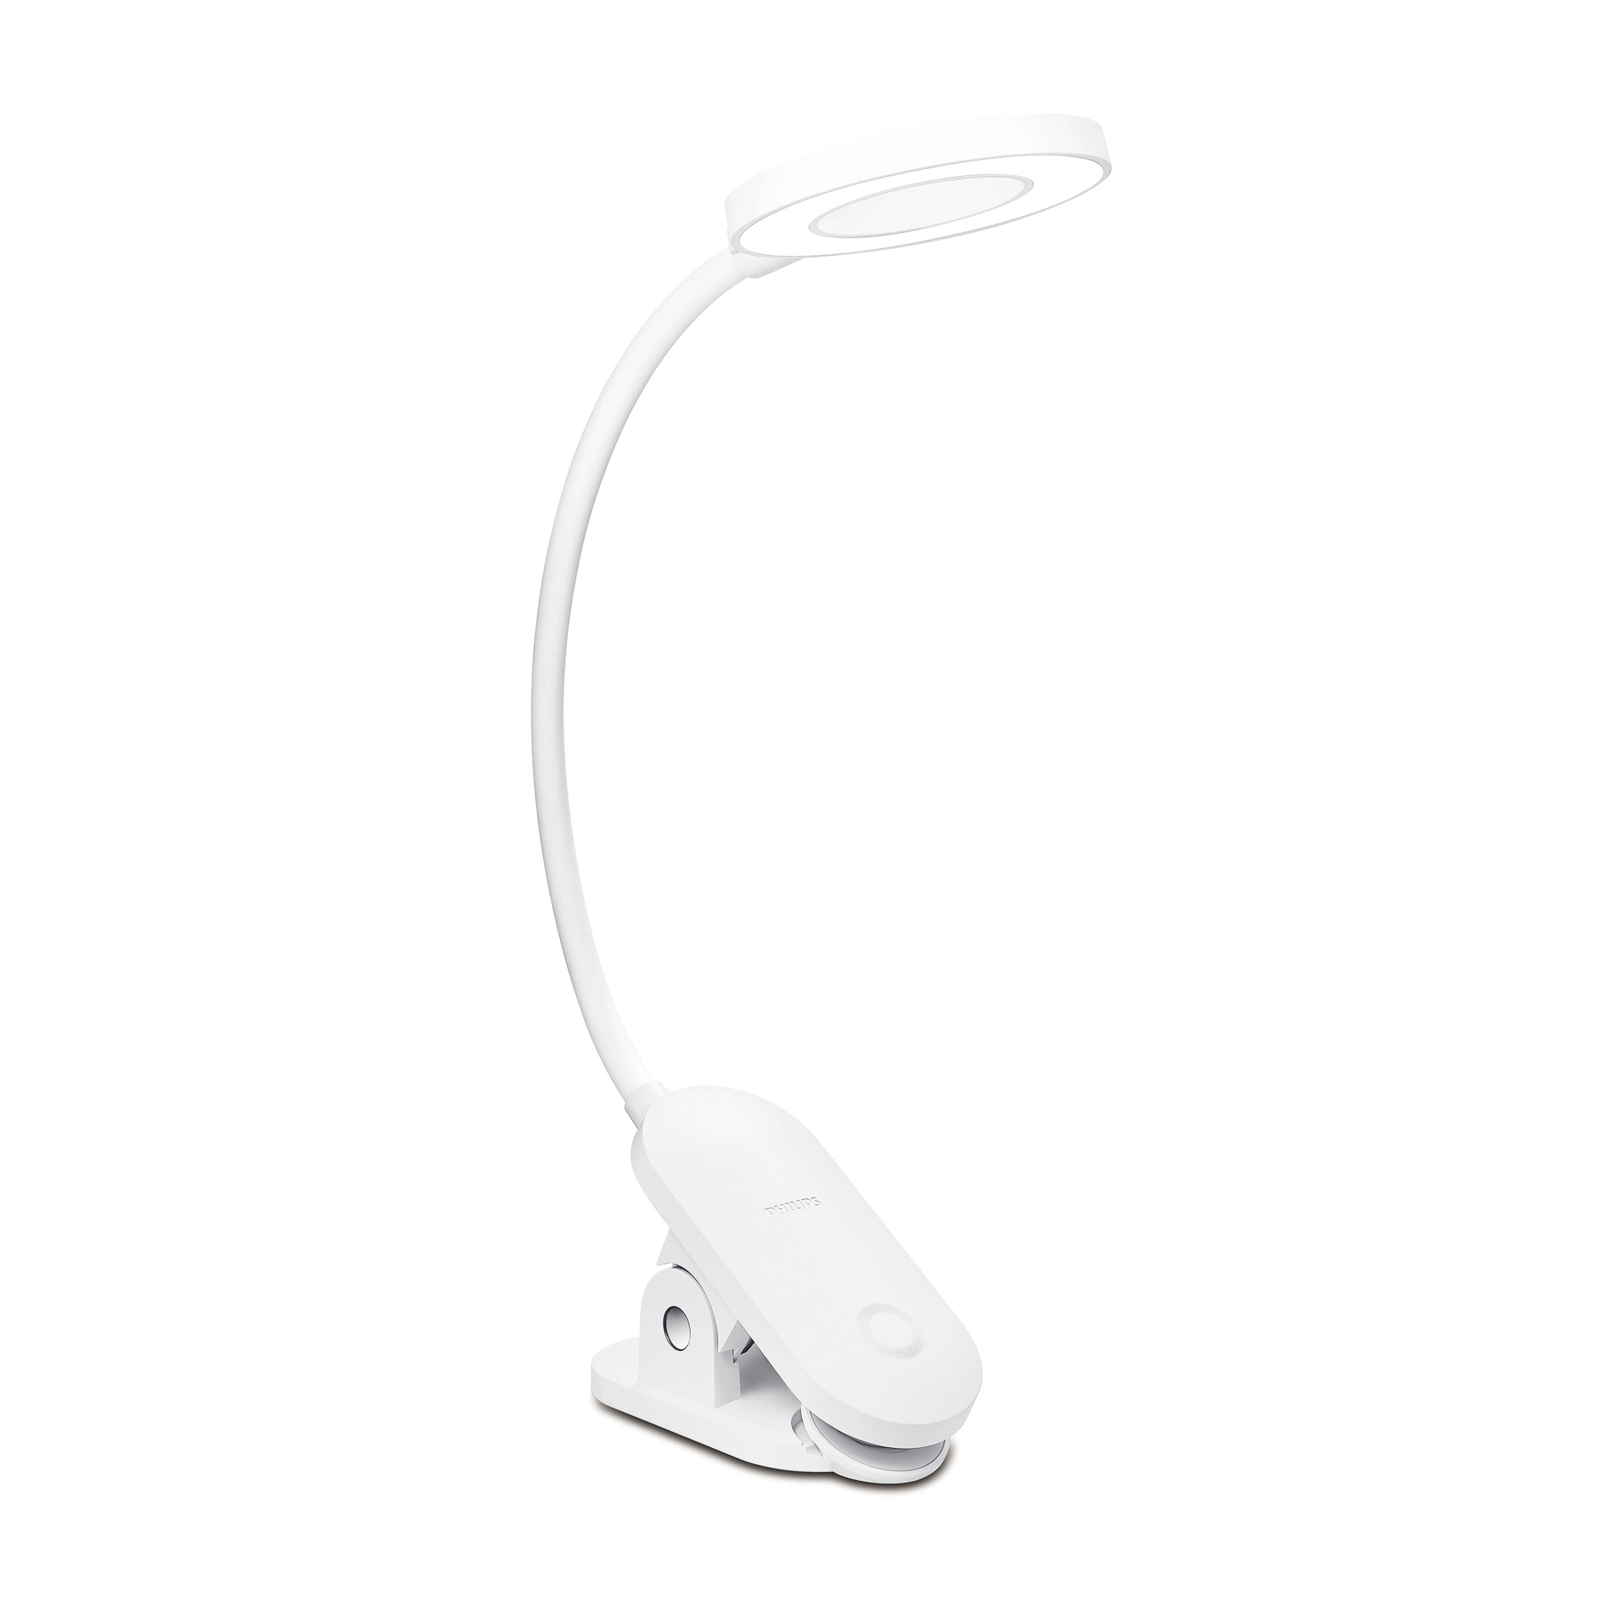 Philips LED klemlamp Forys met accu